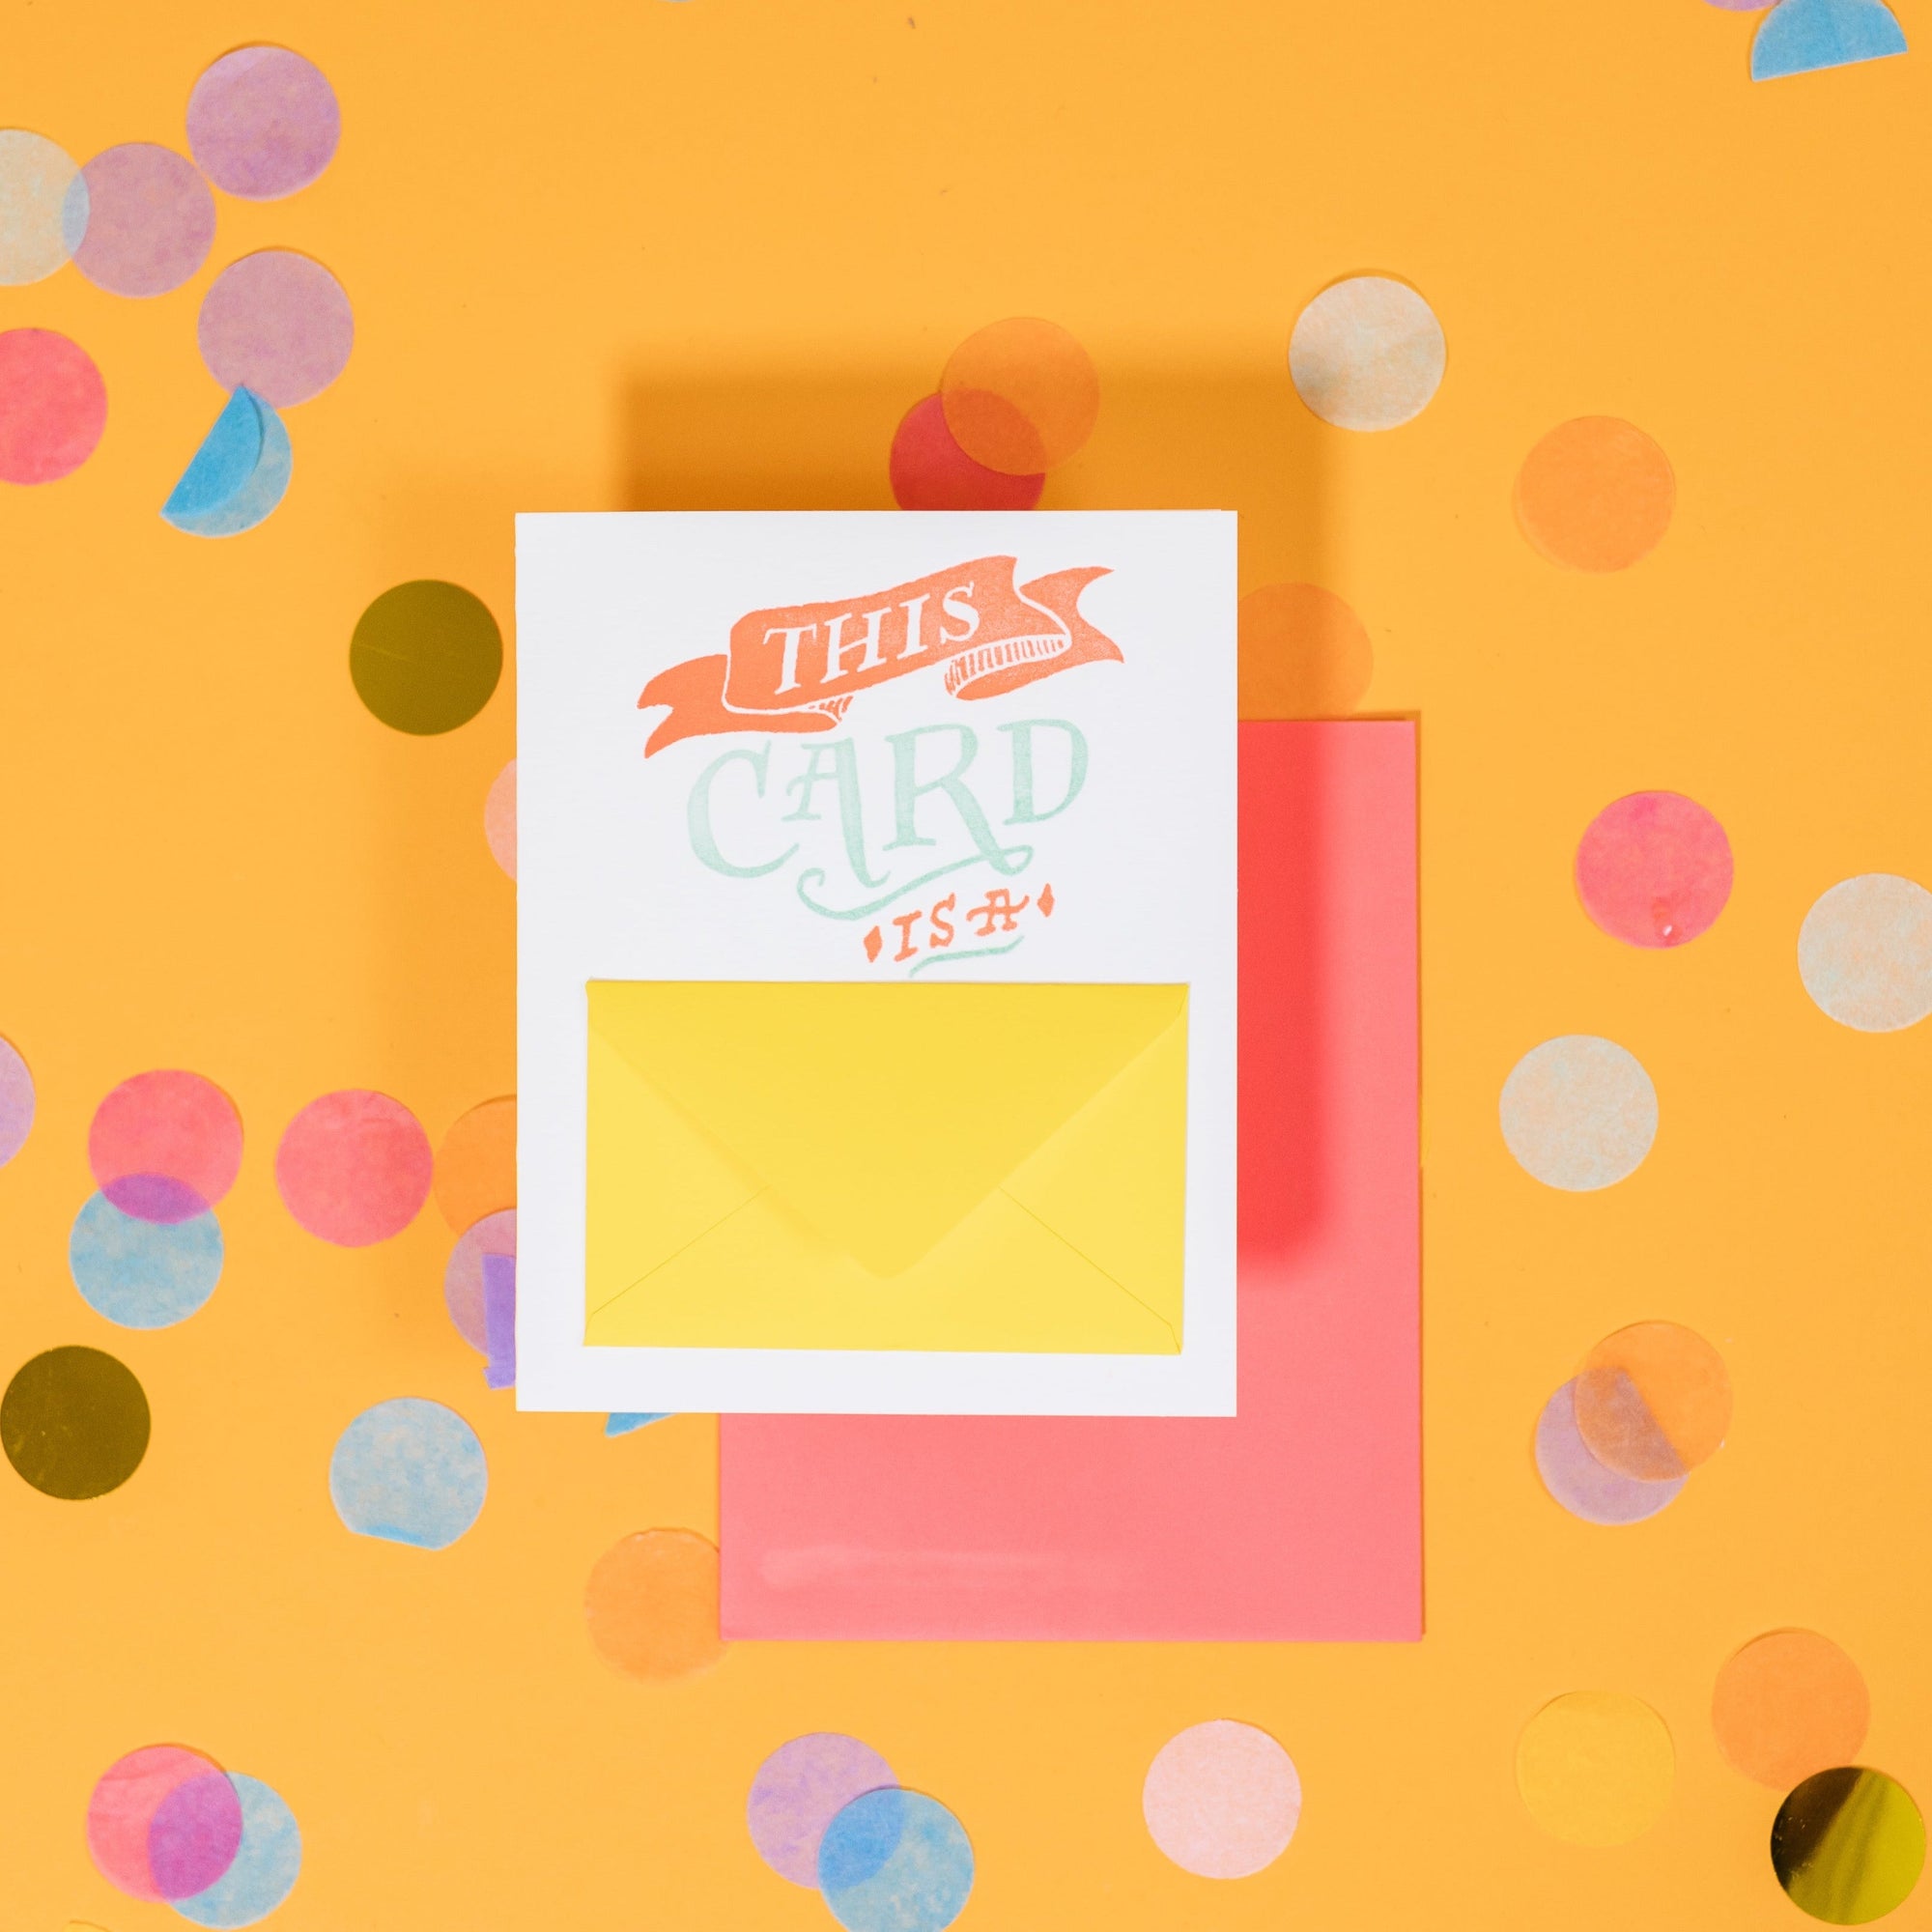 On a sunny mustard background is a greeting card and envelope with big, colorful confetti scattered around. The white greeting card says "This Card Is A" in handwritten vintage orange and cool aqua letterpress lettering. There is a white mini card inside small yellow envelope on the front that says "HUG" in orange in a big, bold font. The watermelon pink envelope sits under the card. 